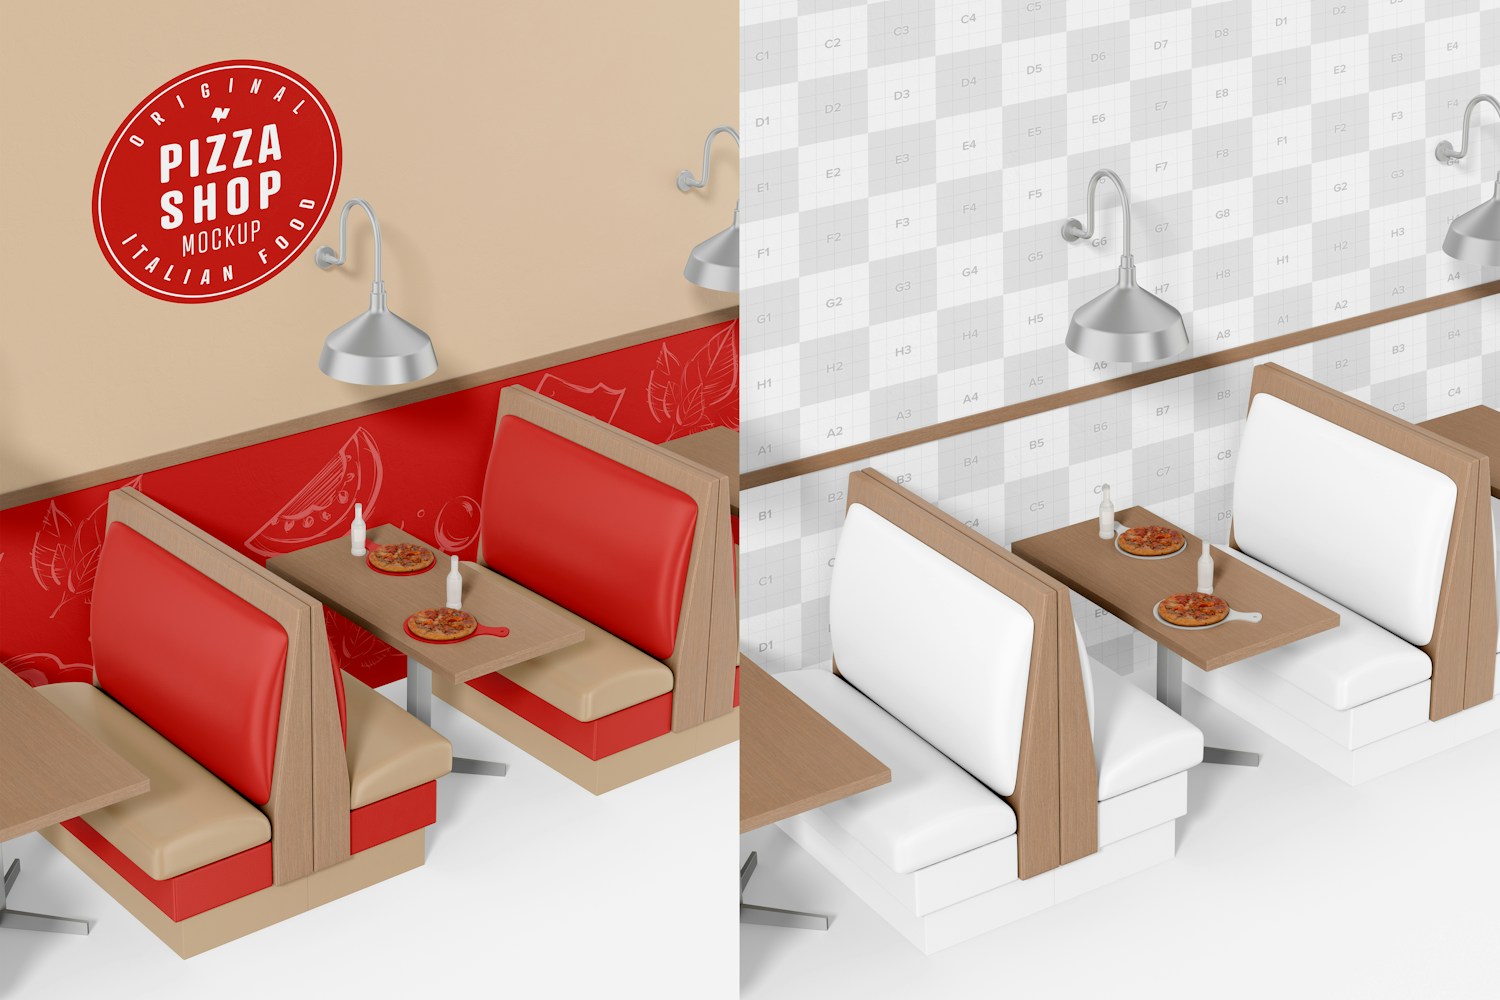 Pizza Shop Chair and Table Scene Mockup, Perspective